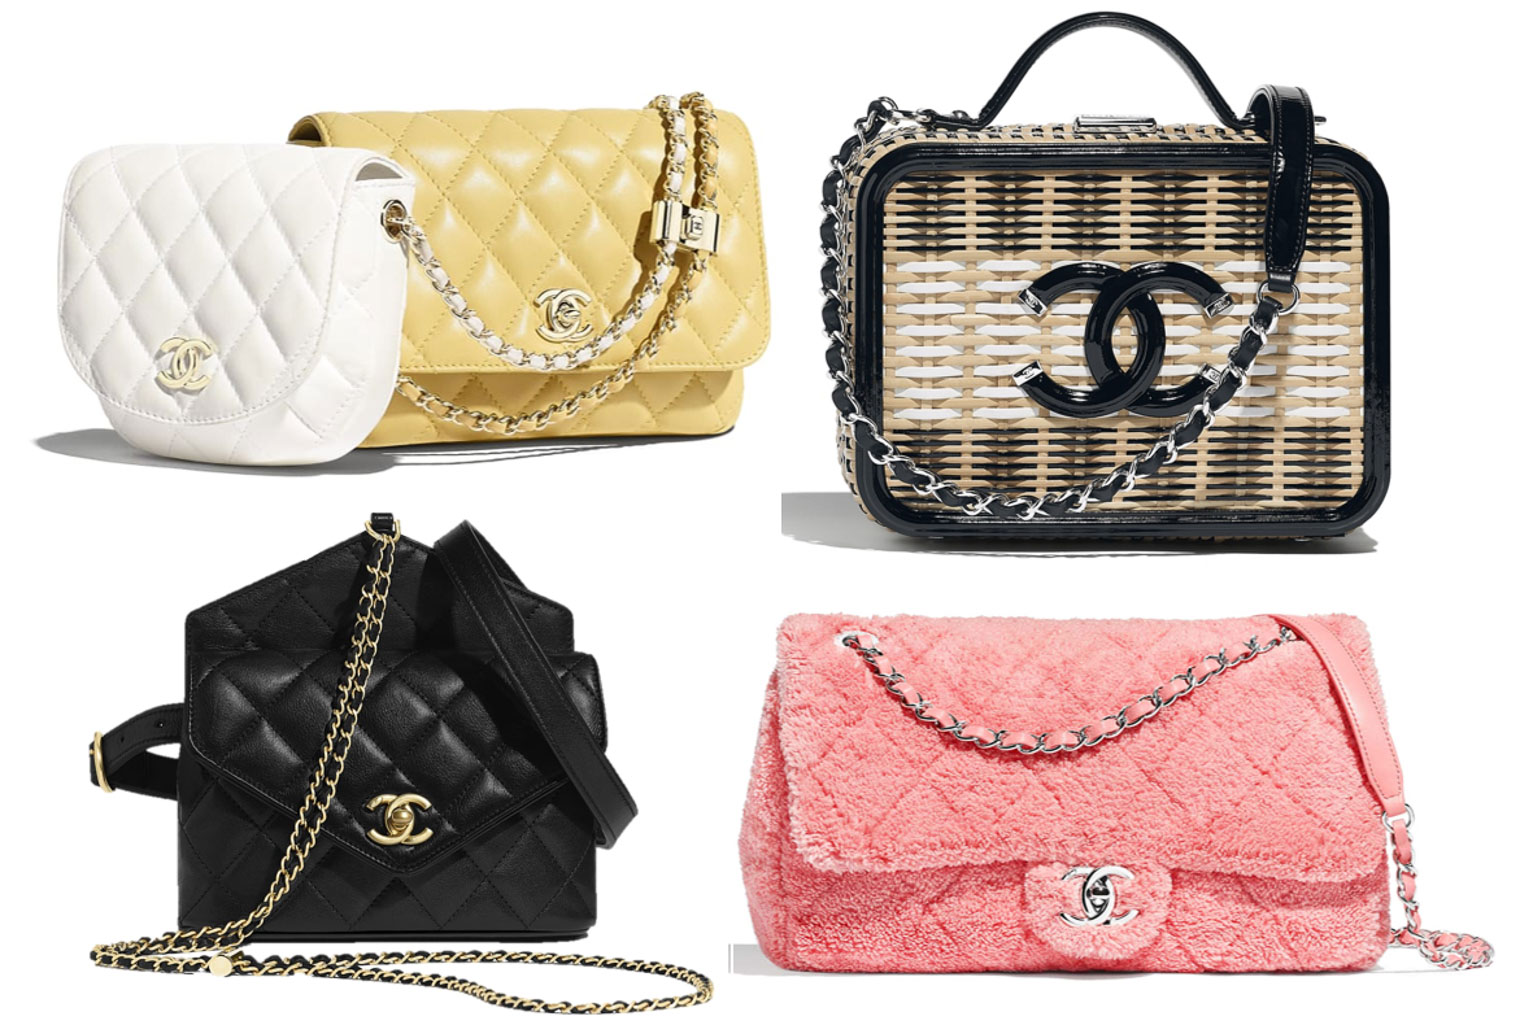 Top 10 Chanel handbags from summer collection 2019 | Chic Journal blog